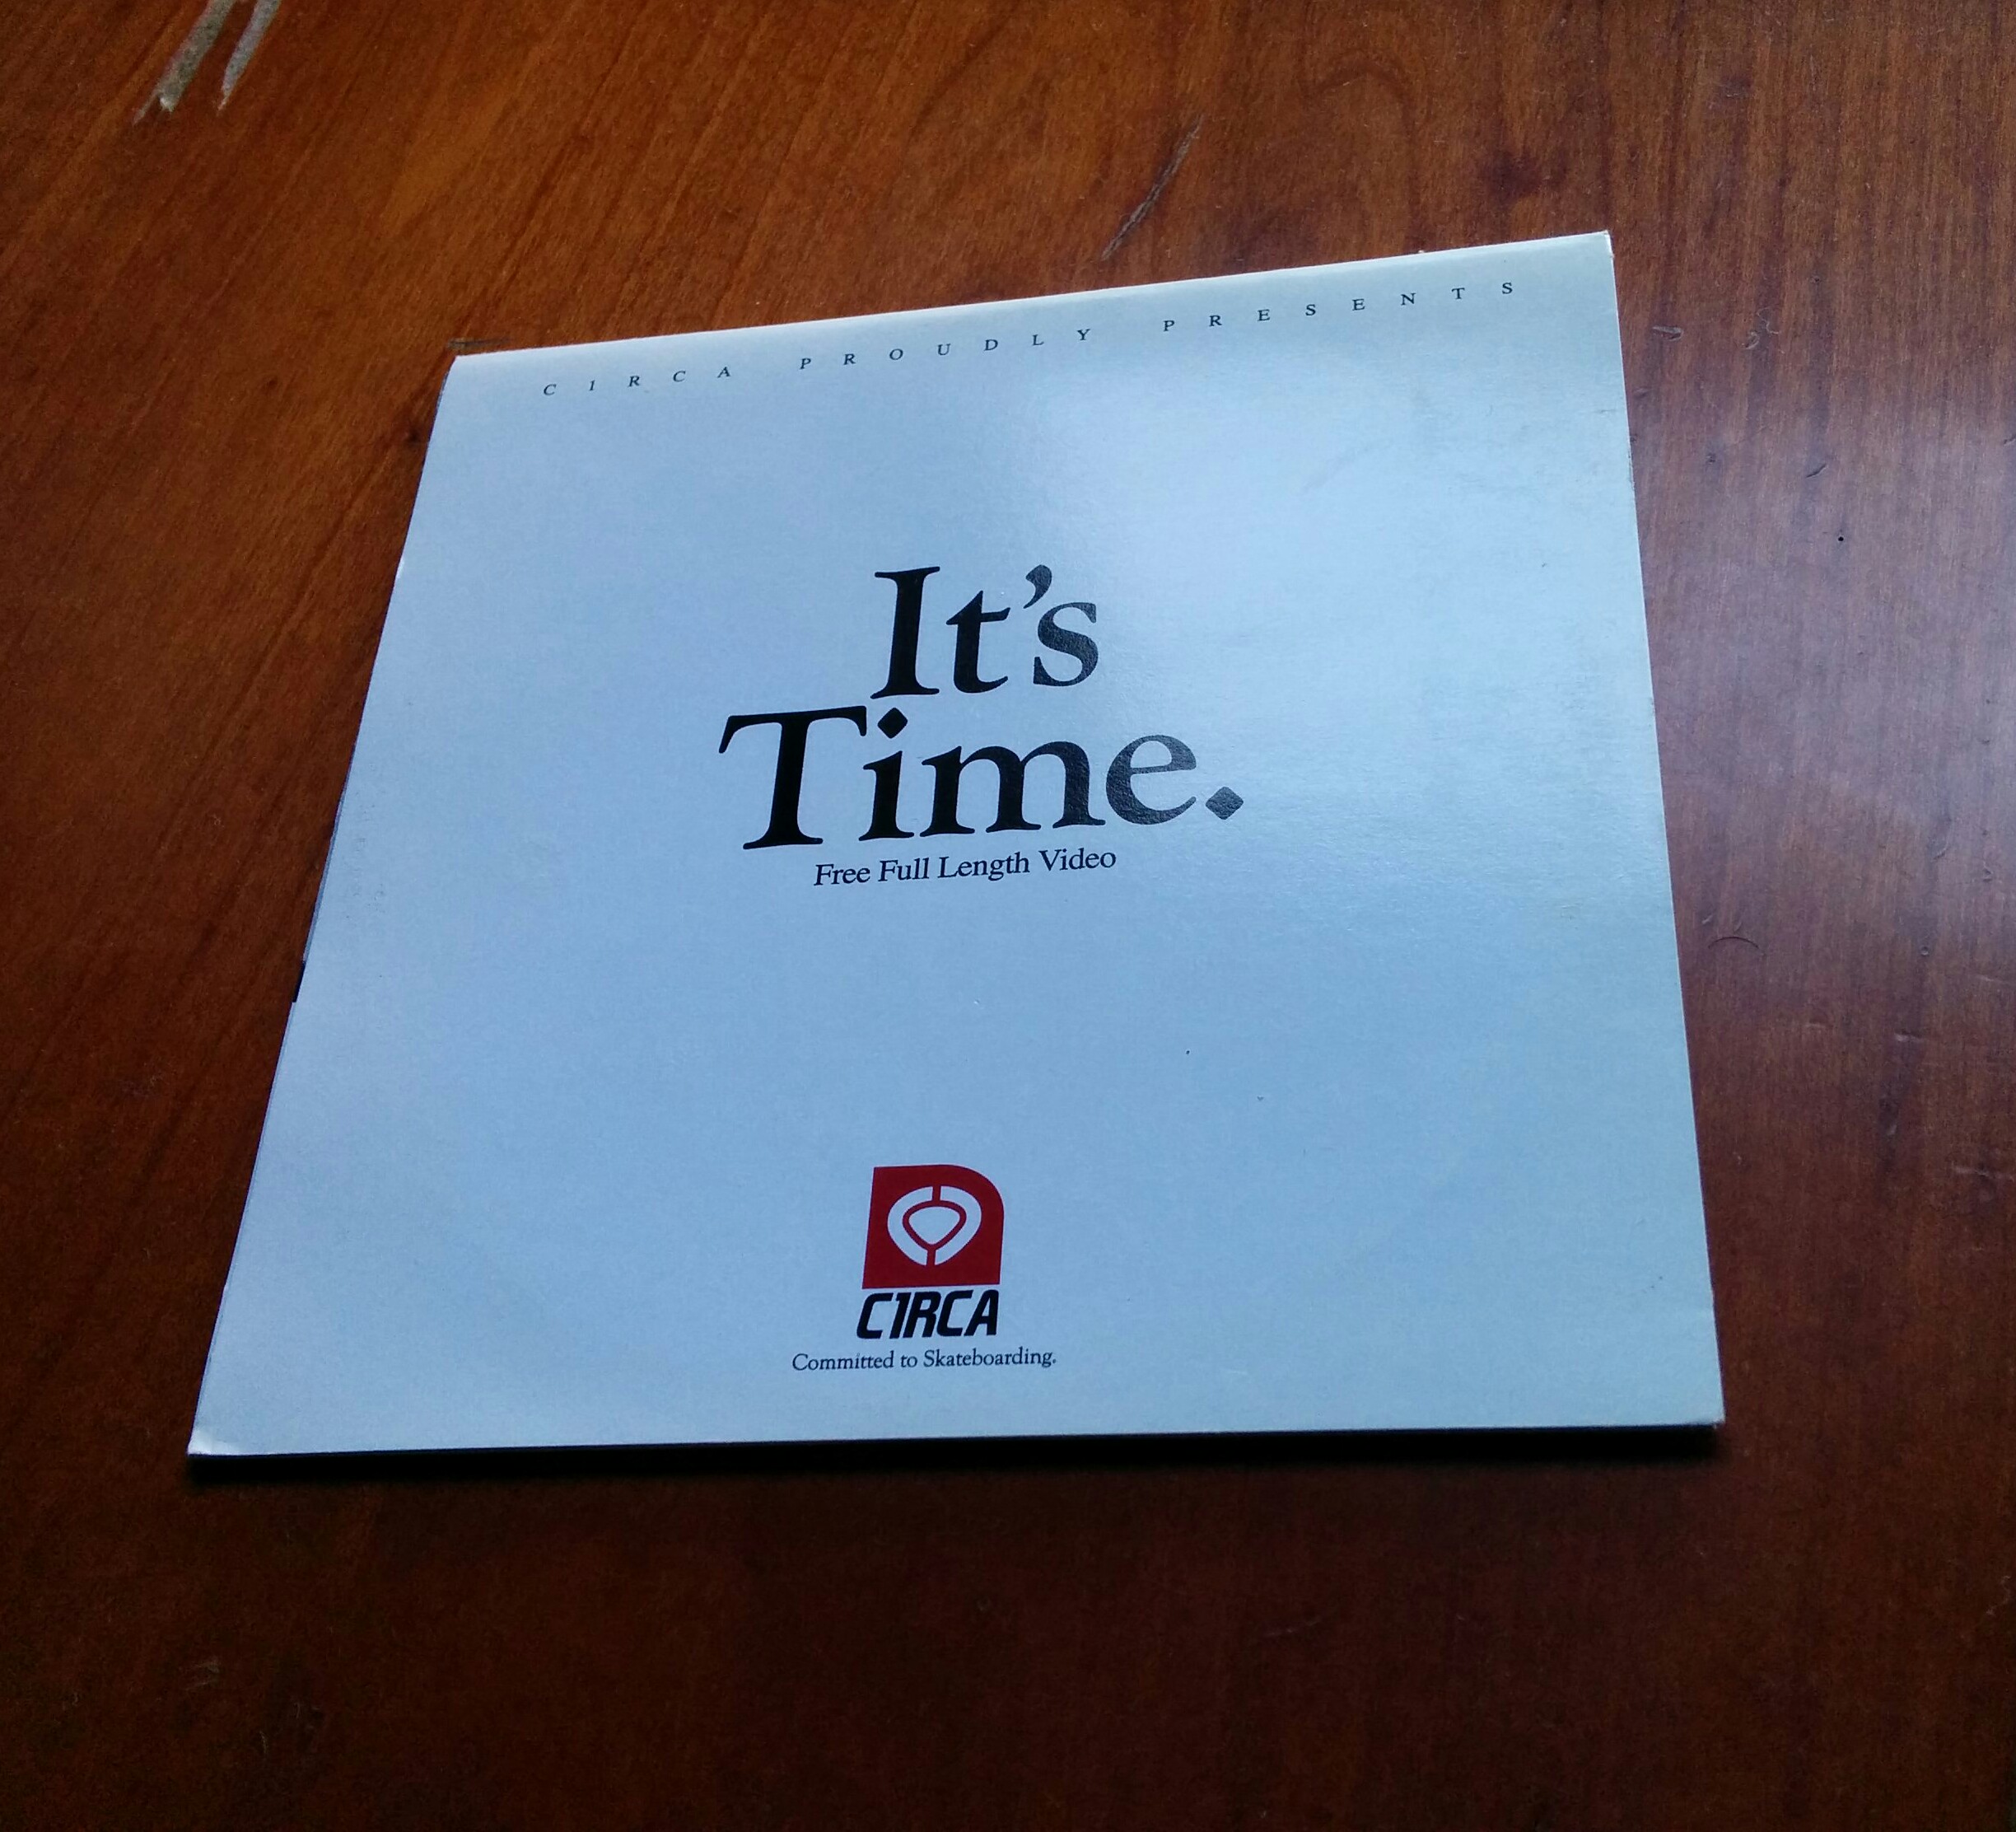 C1RCA - It's Time cover